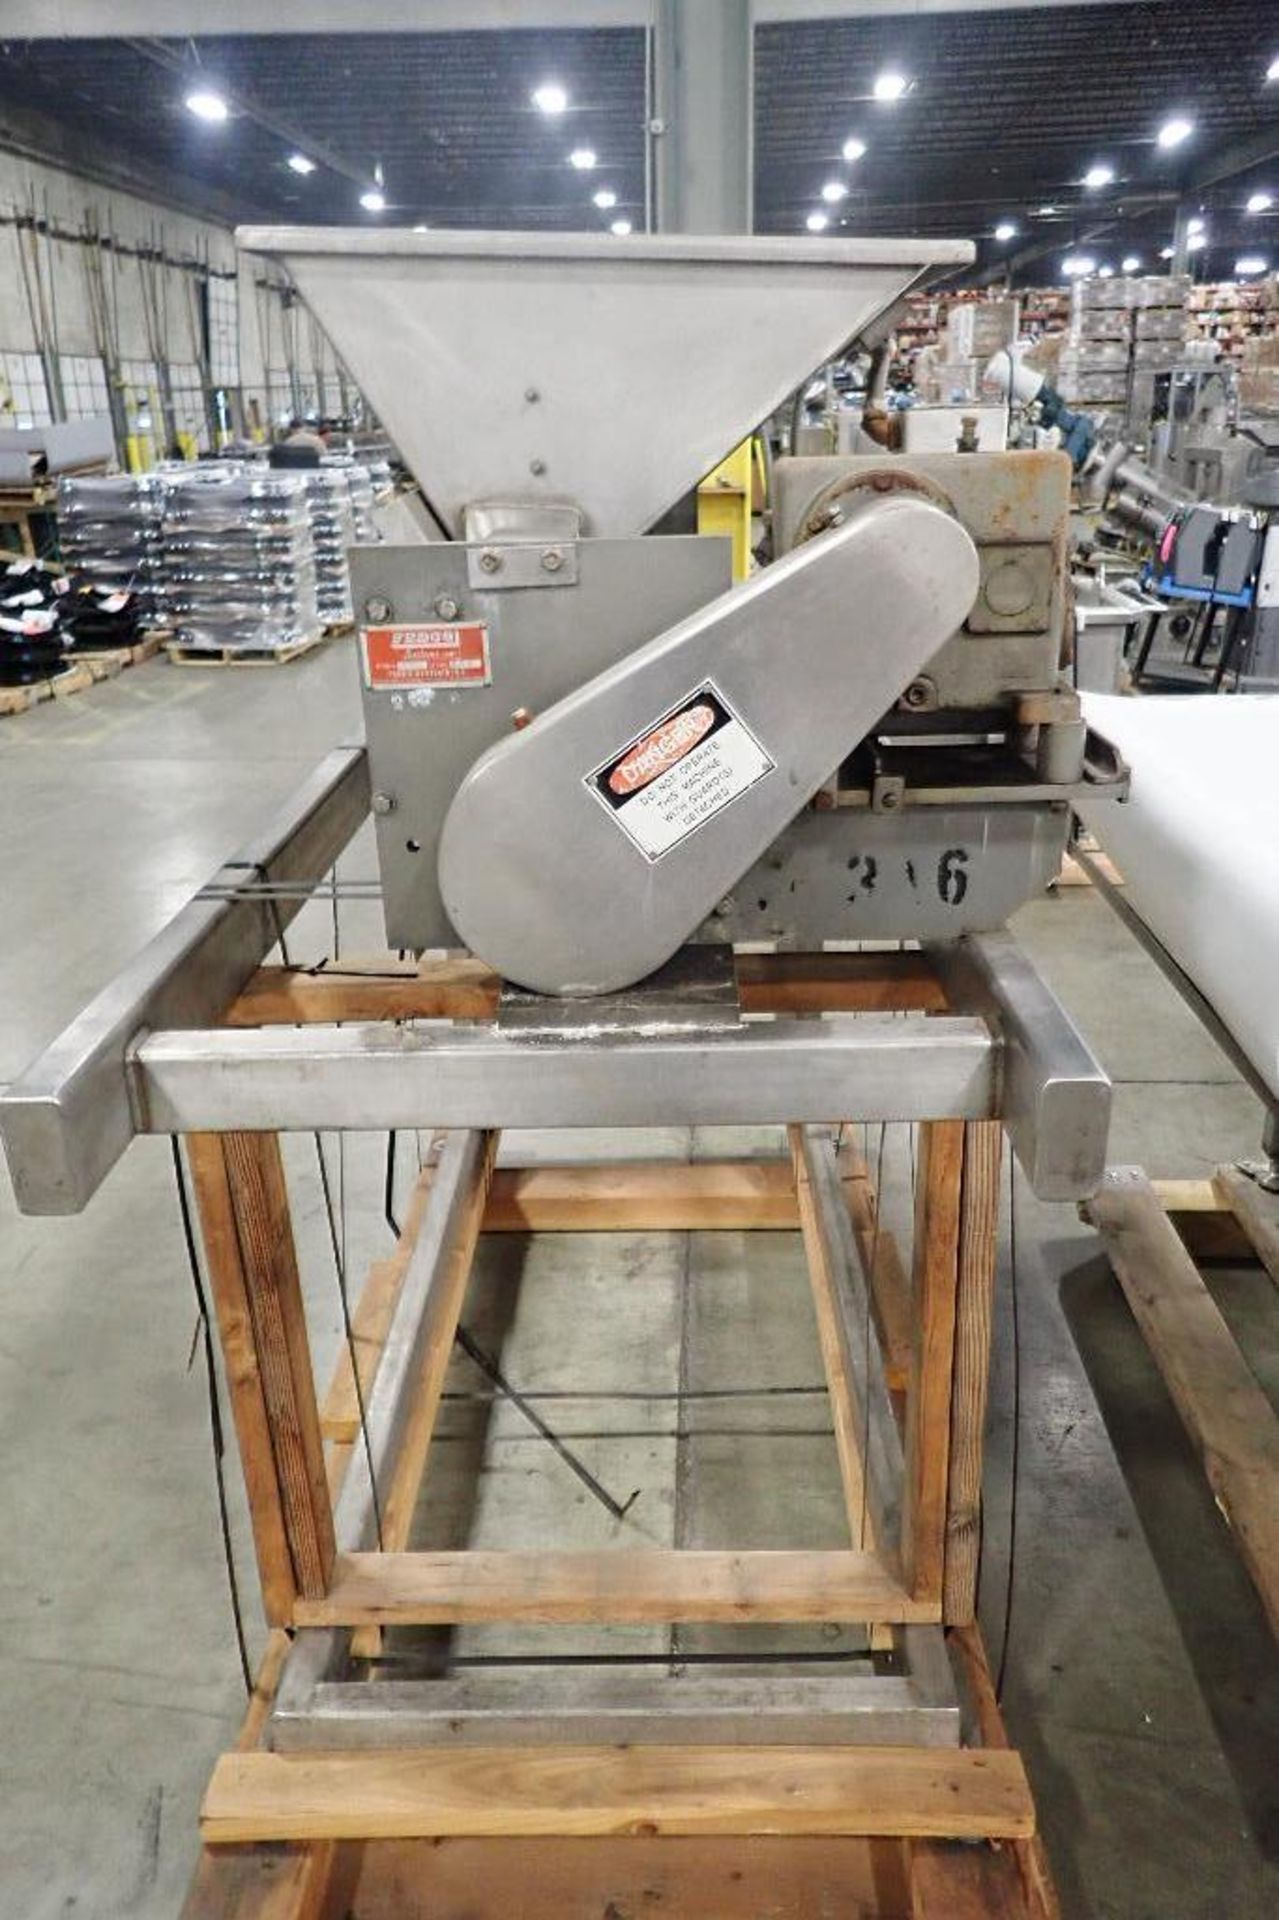 Fedco depositor, Model 40, SN 134, 48 in. wide roll, SS frame, motor and drive, oscillating knife. * - Image 7 of 10